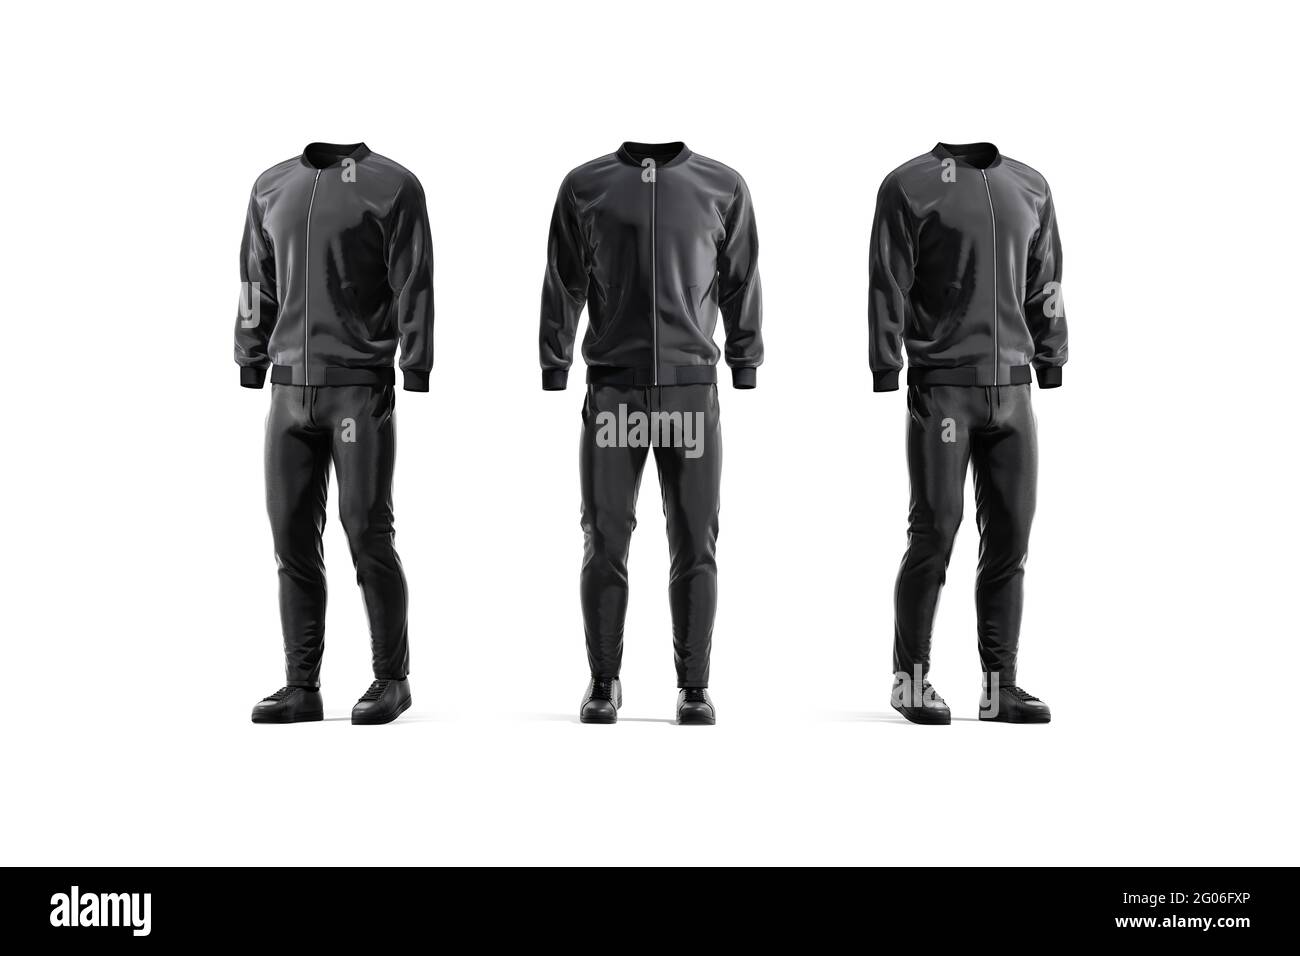 Download Tracksuit Jacket High Resolution Stock Photography And Images Alamy